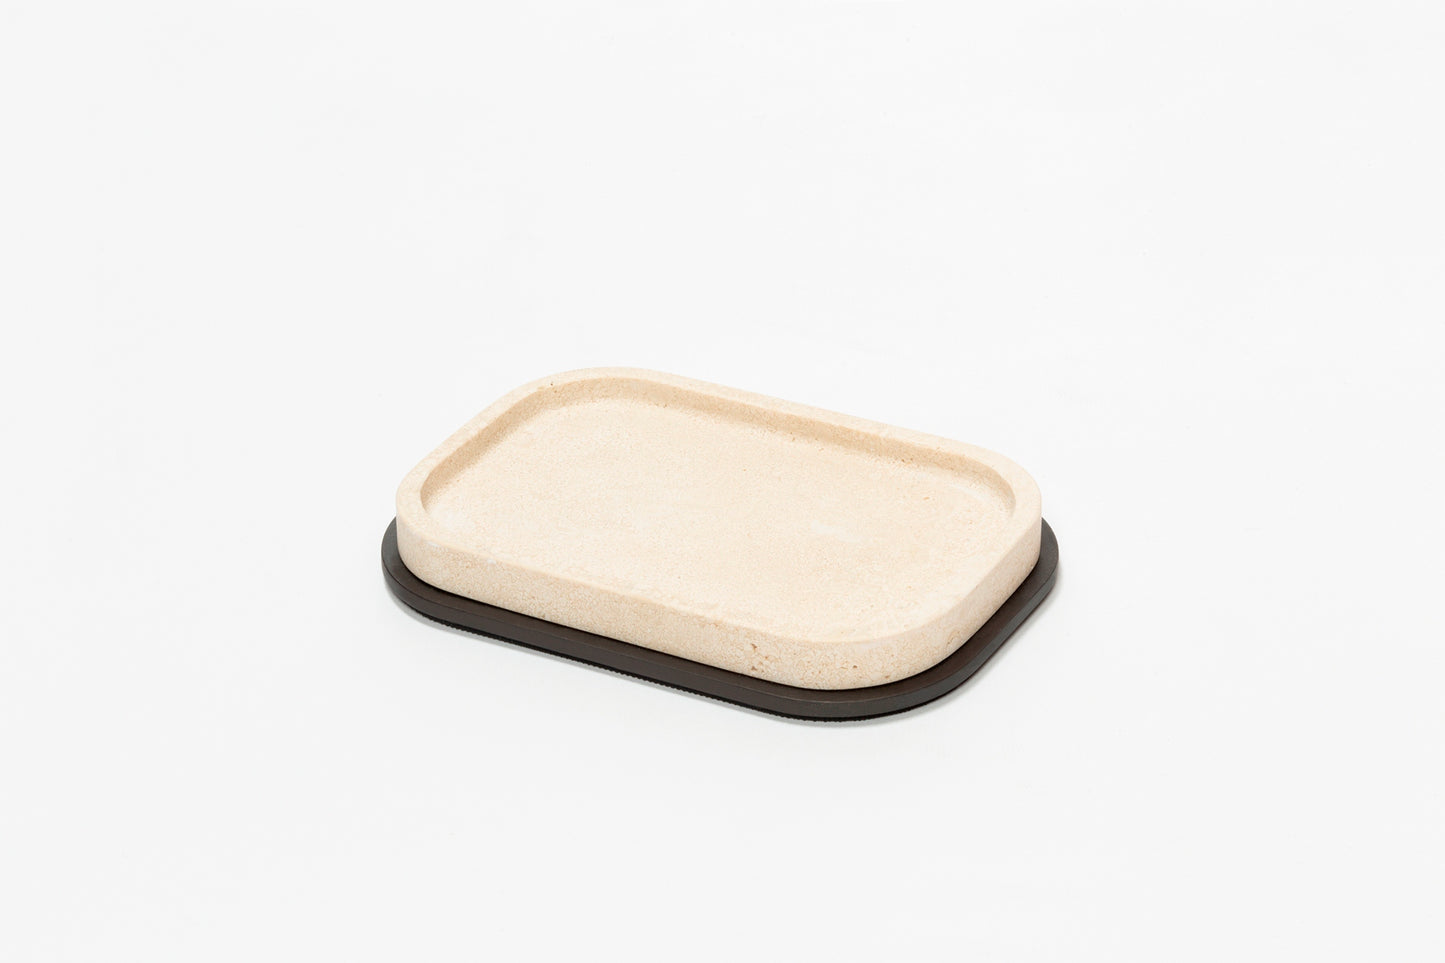 Giobagnara Polo Marble Valet Tray | Marble Structure with Brass Base Frame | Non-Slip Waterproof Rubber Base | Part of Polo Marble Bathroom Set | Iconic Silhouette with Rounded Corners | Unique and Exclusive Design | Explore the Polo Marble Bathroom Collection at 2Jour Concierge, #1 luxury high-end gift & lifestyle shop